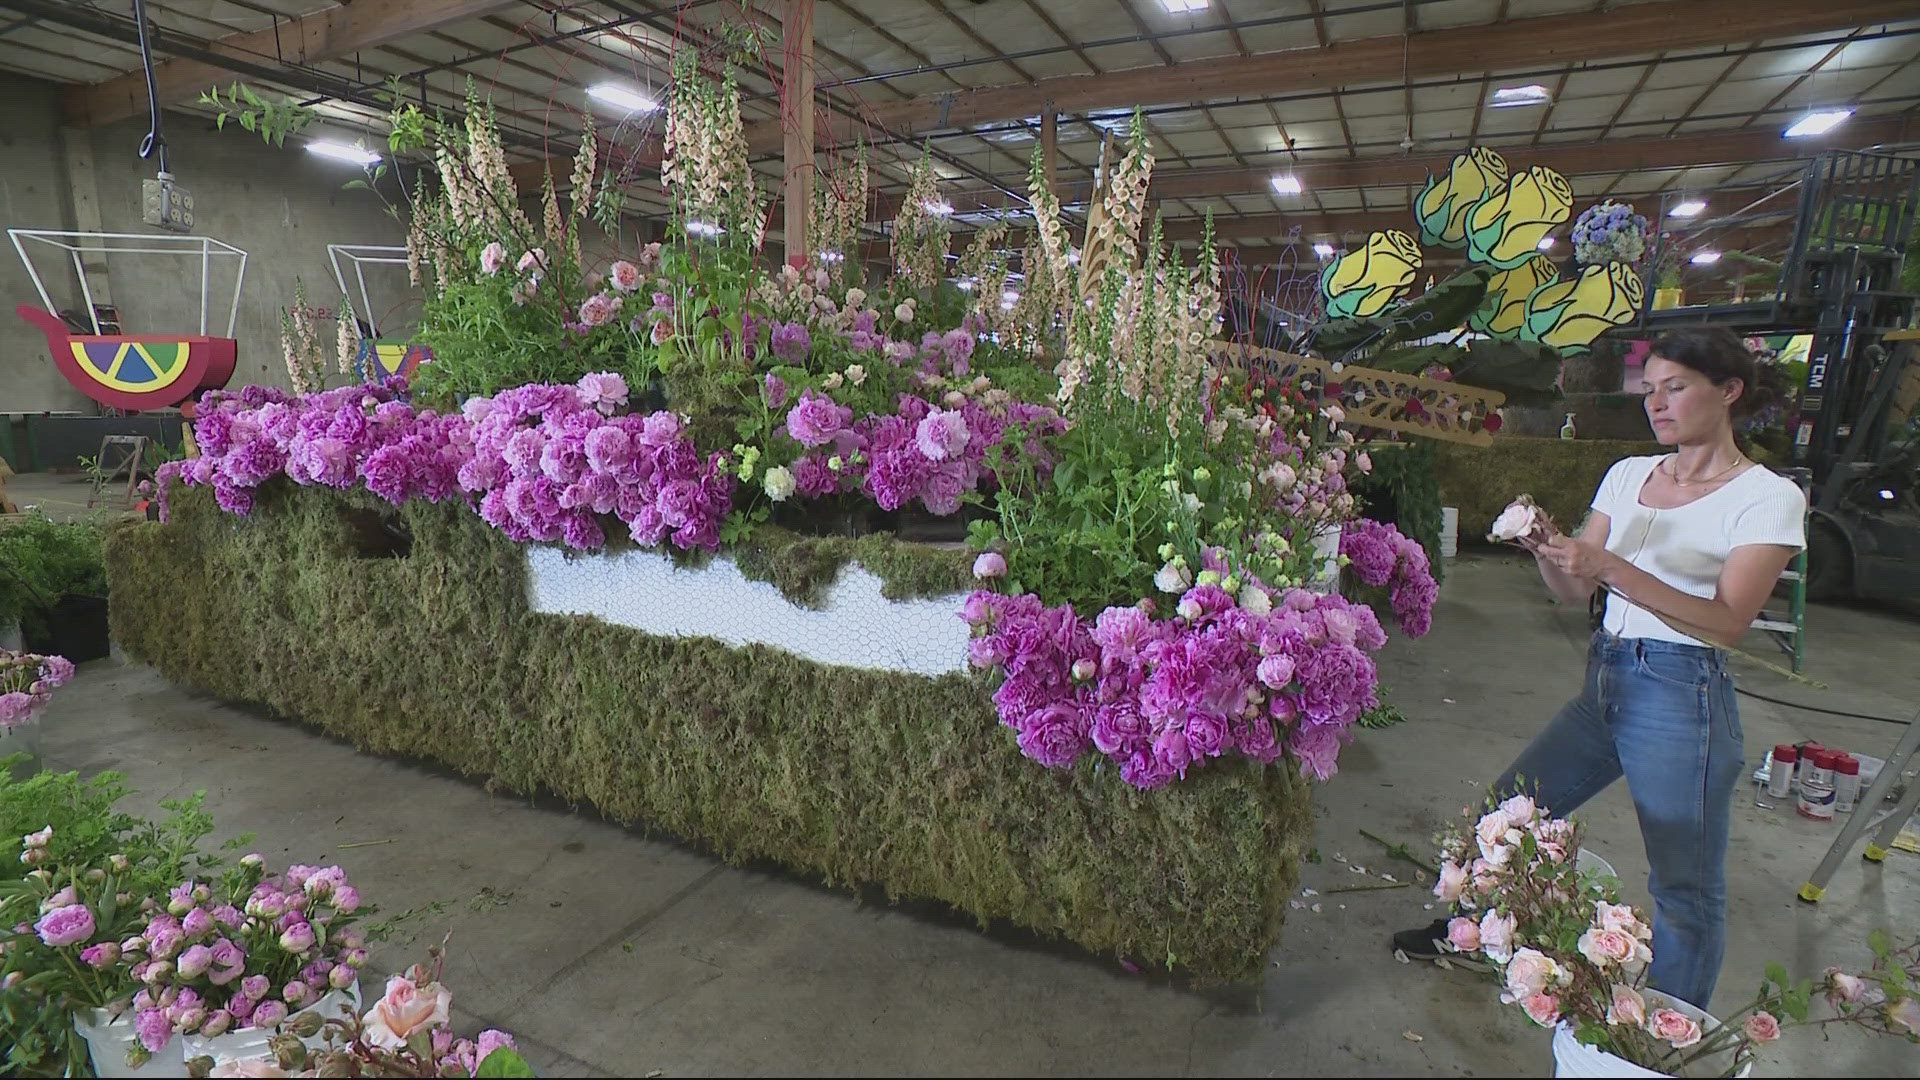 It's the city's first float in three decades, covered in 5,000 blooms and blossoms.